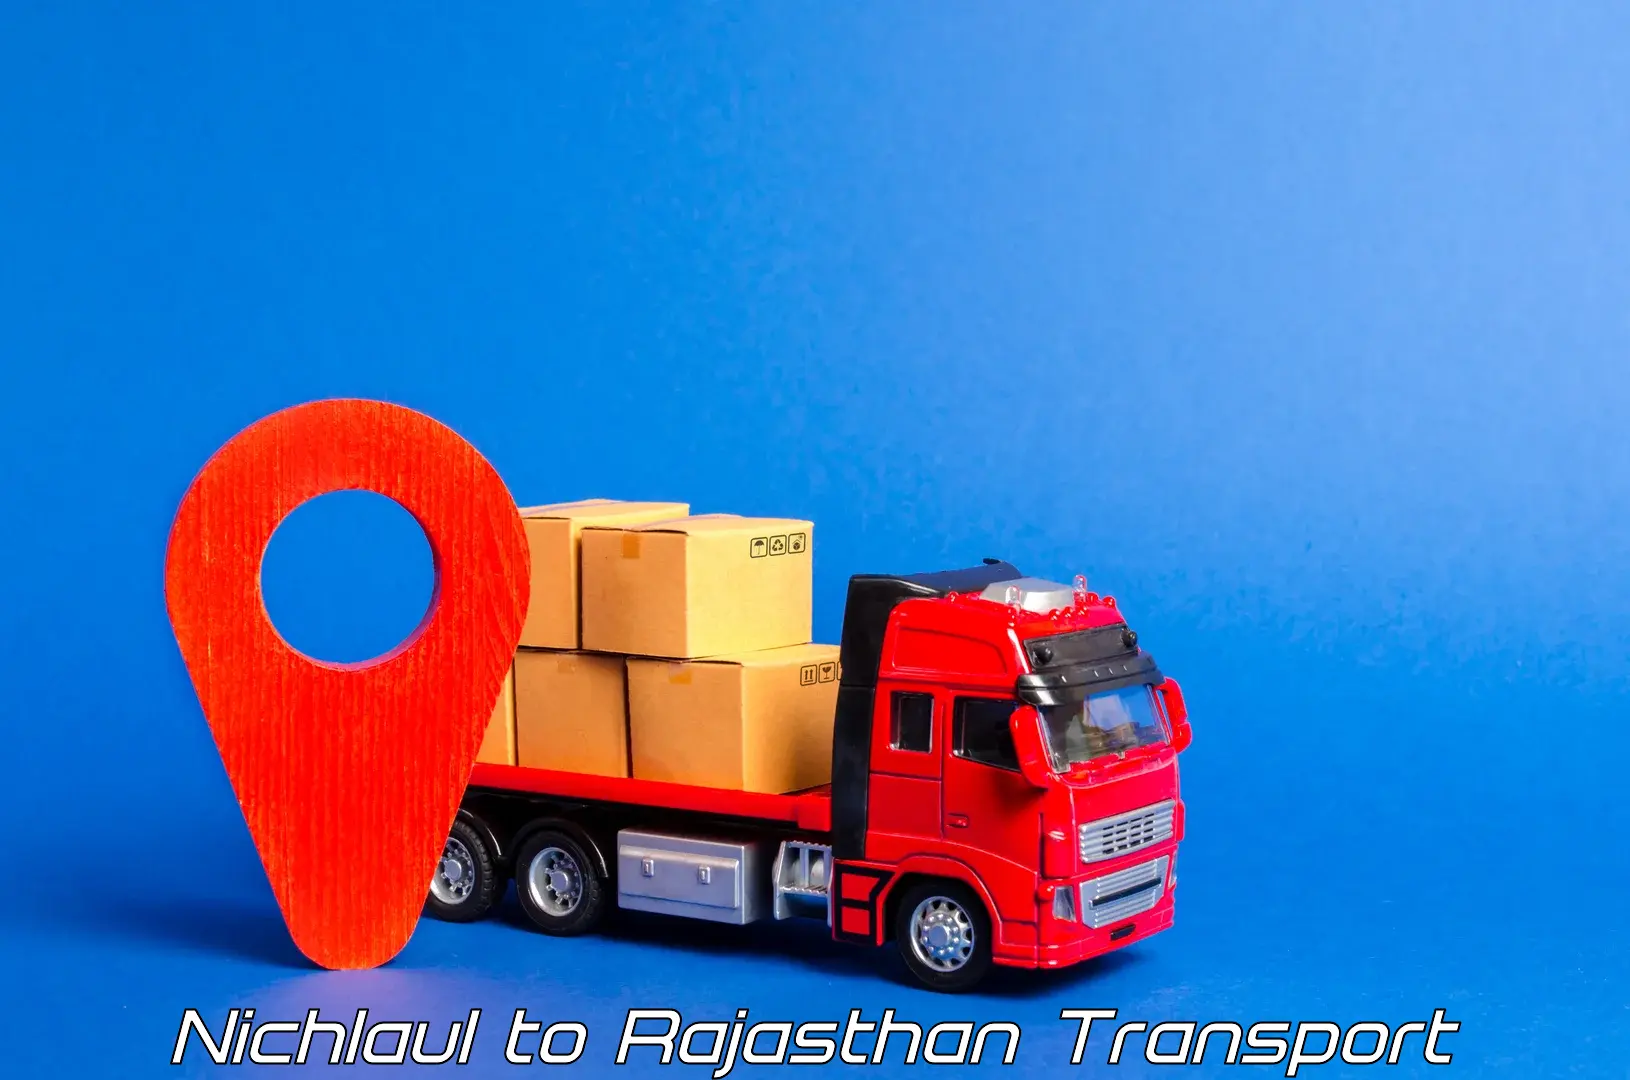 Air freight transport services Nichlaul to Rajasthan